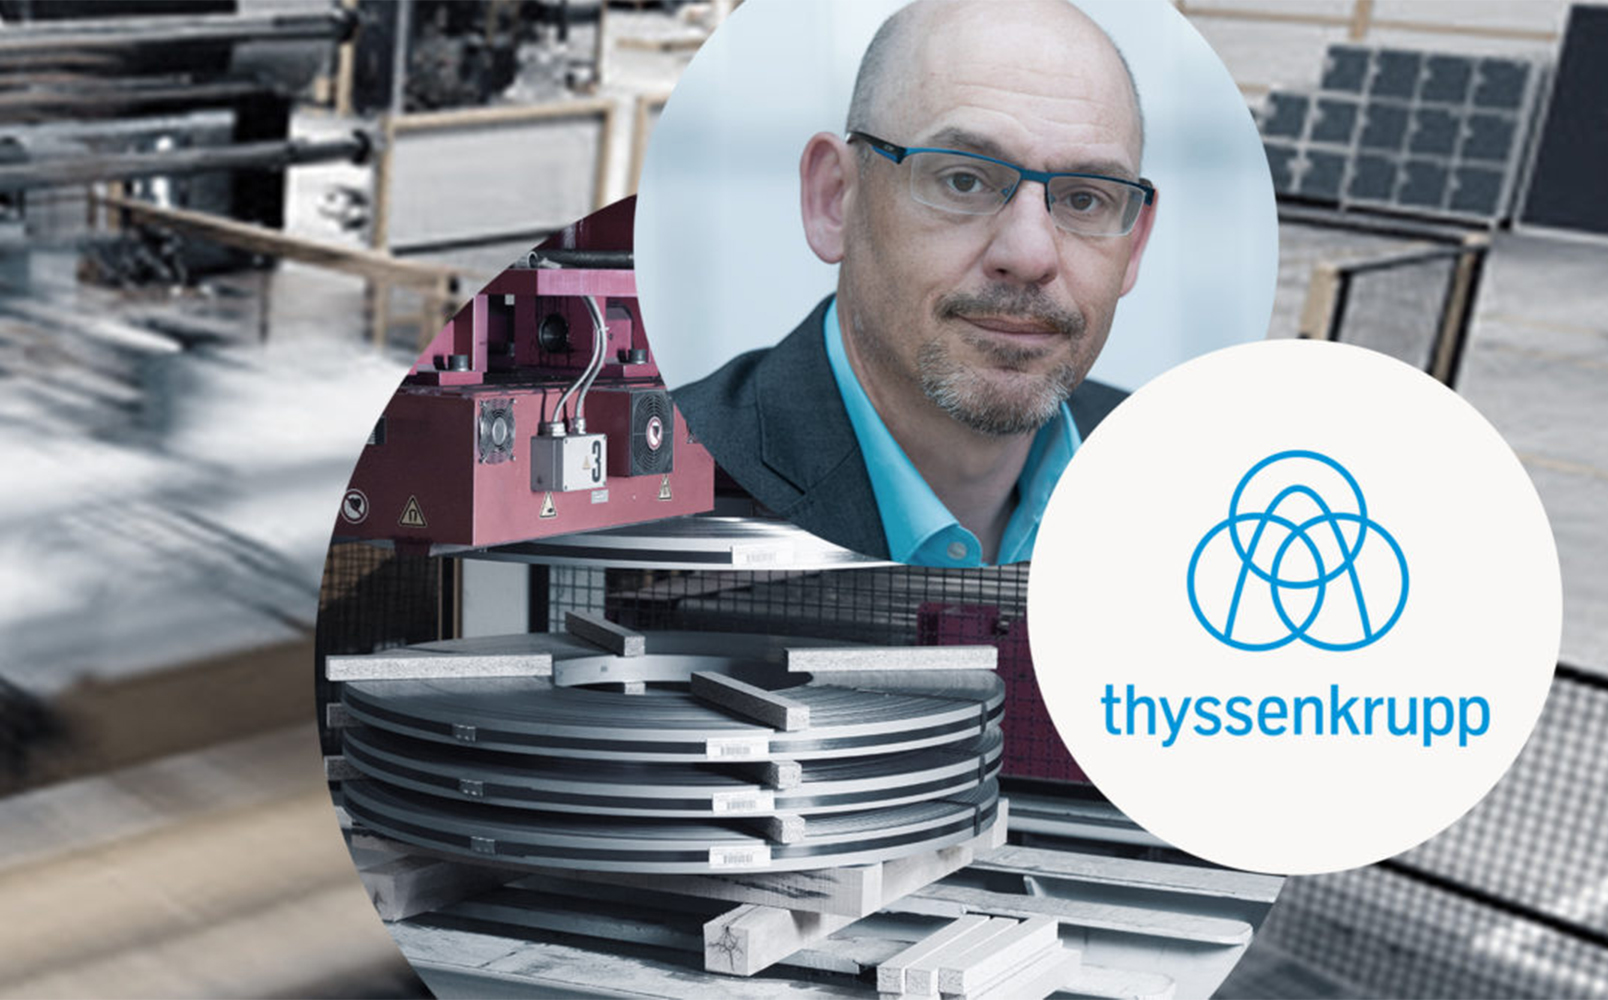 thyssenkrupp takes the leap to cloud with SAP IBP – valantic